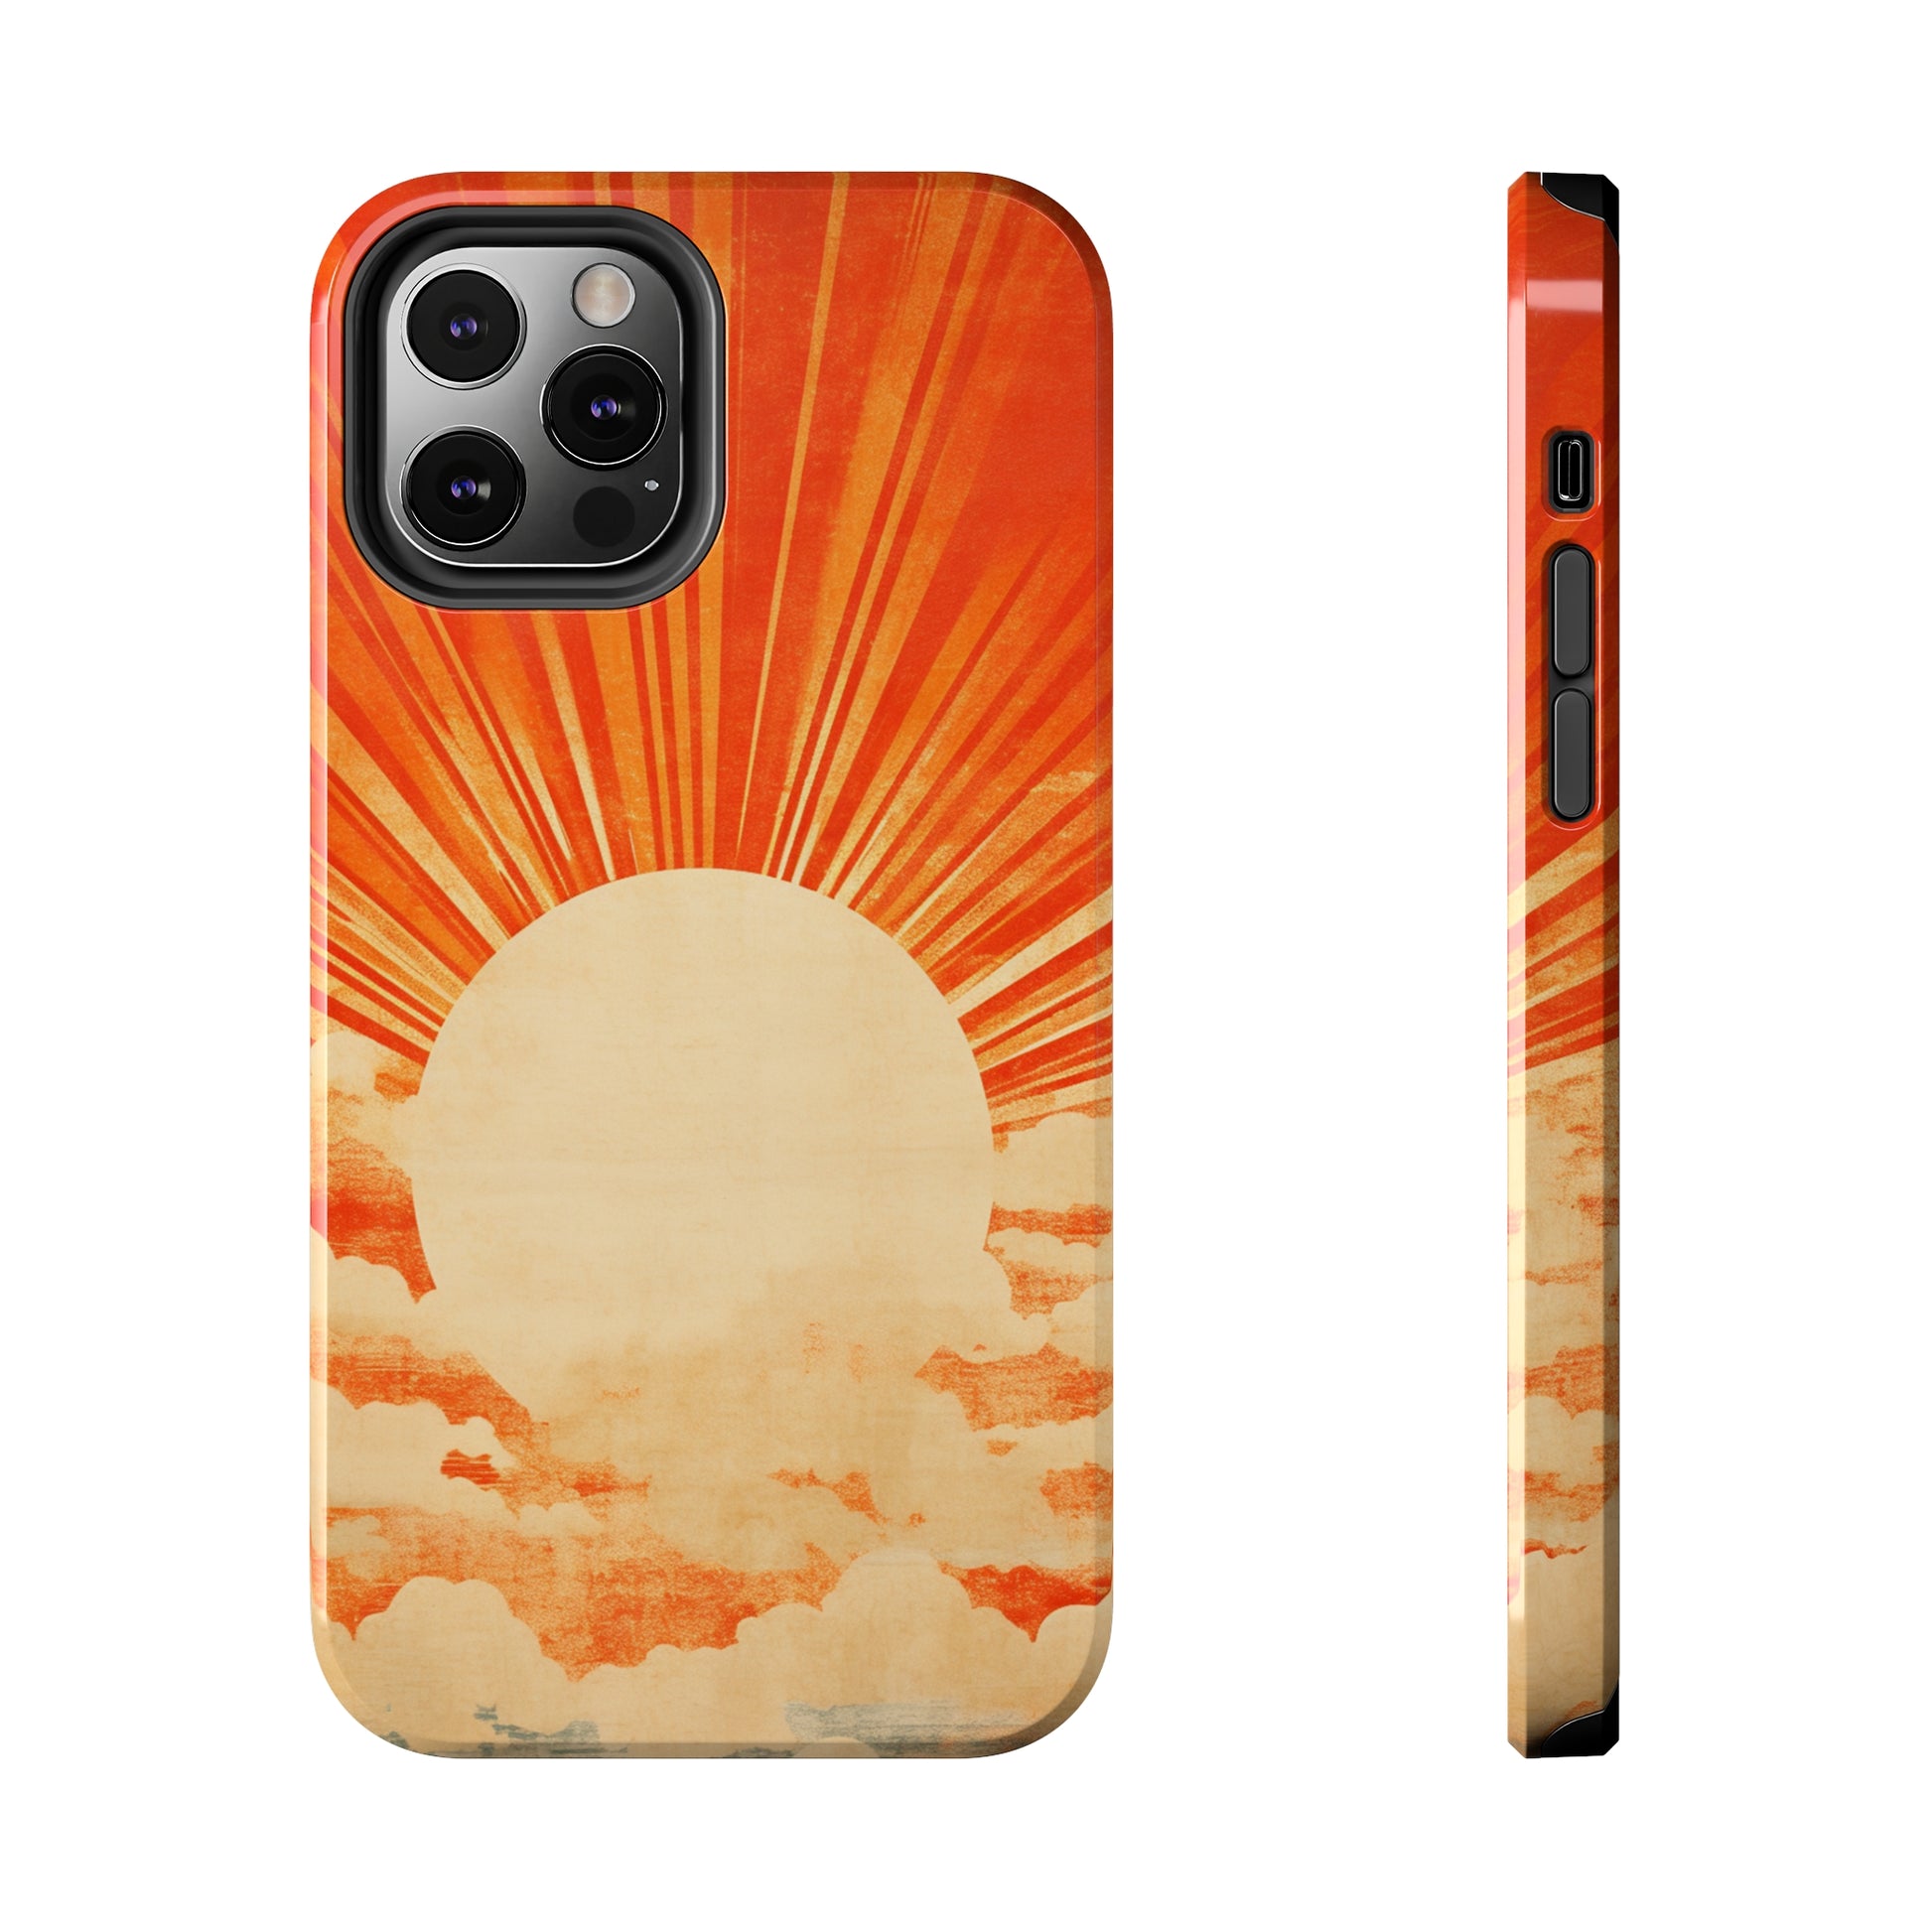 Playful and Vibrant Phone Case with Nostalgic Vibes